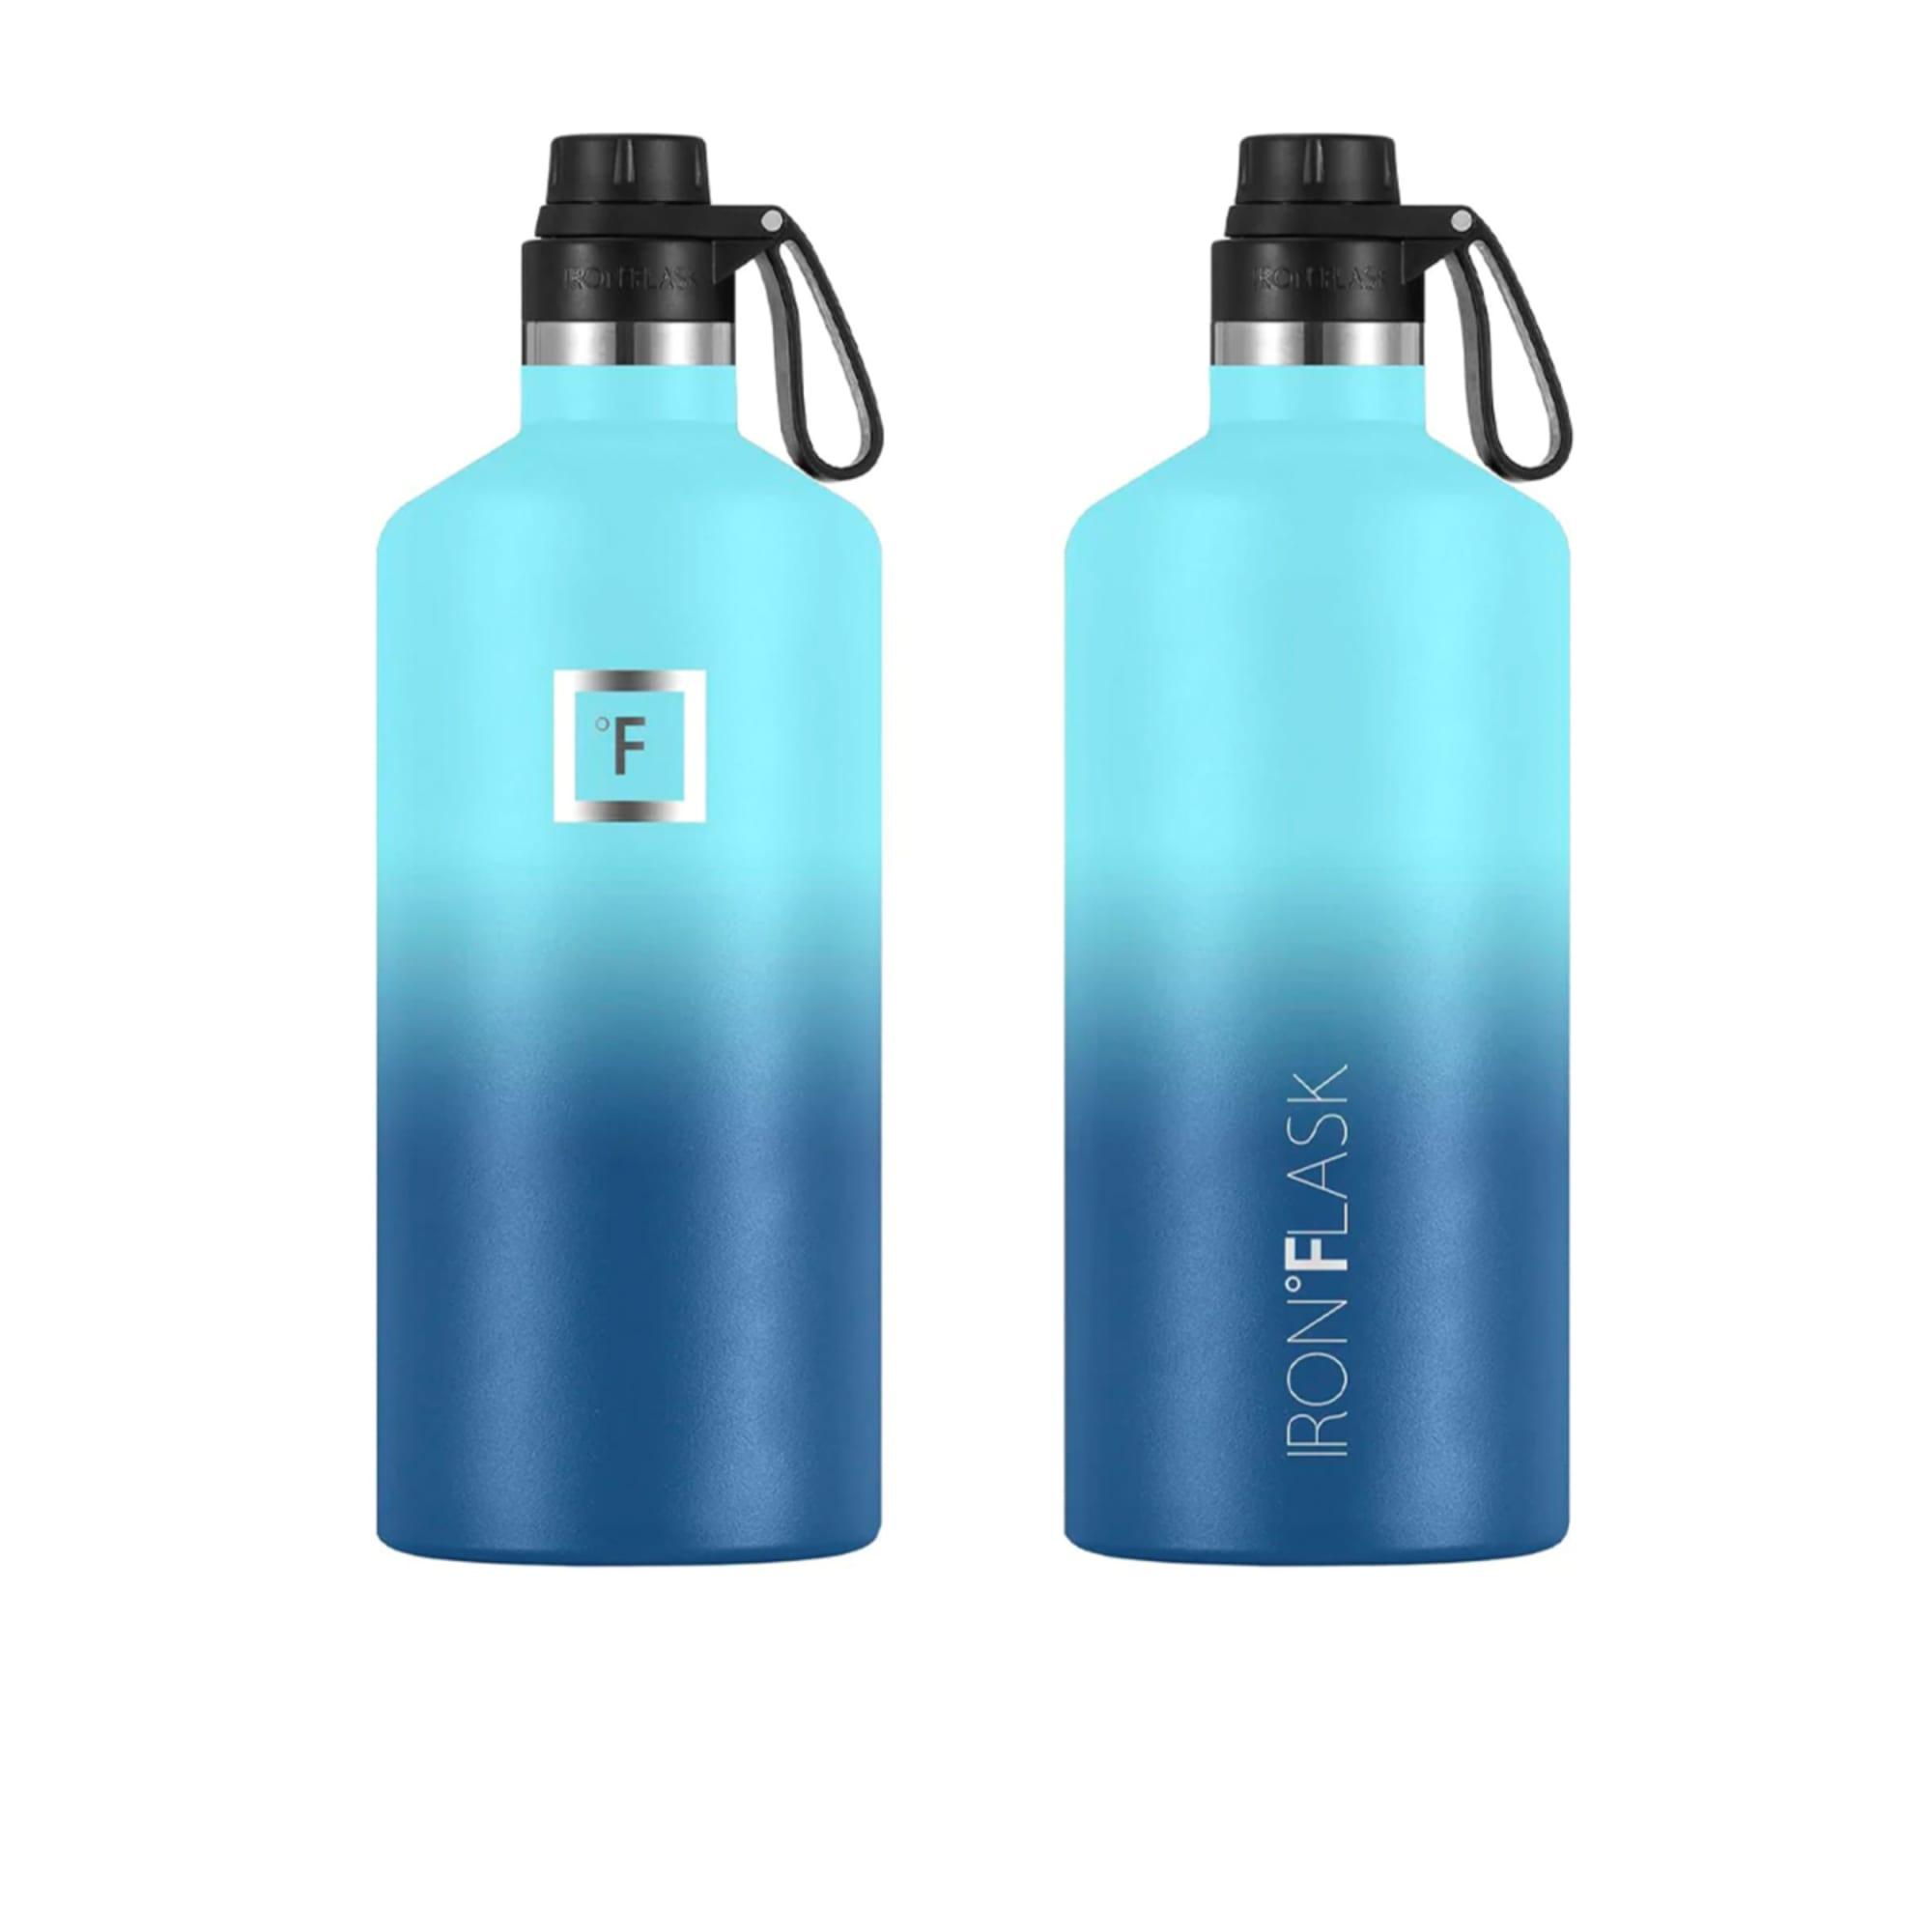 Iron Flask Narrow Mouth Bottle with Spout Lid 1.9L Blue Waves Image 2